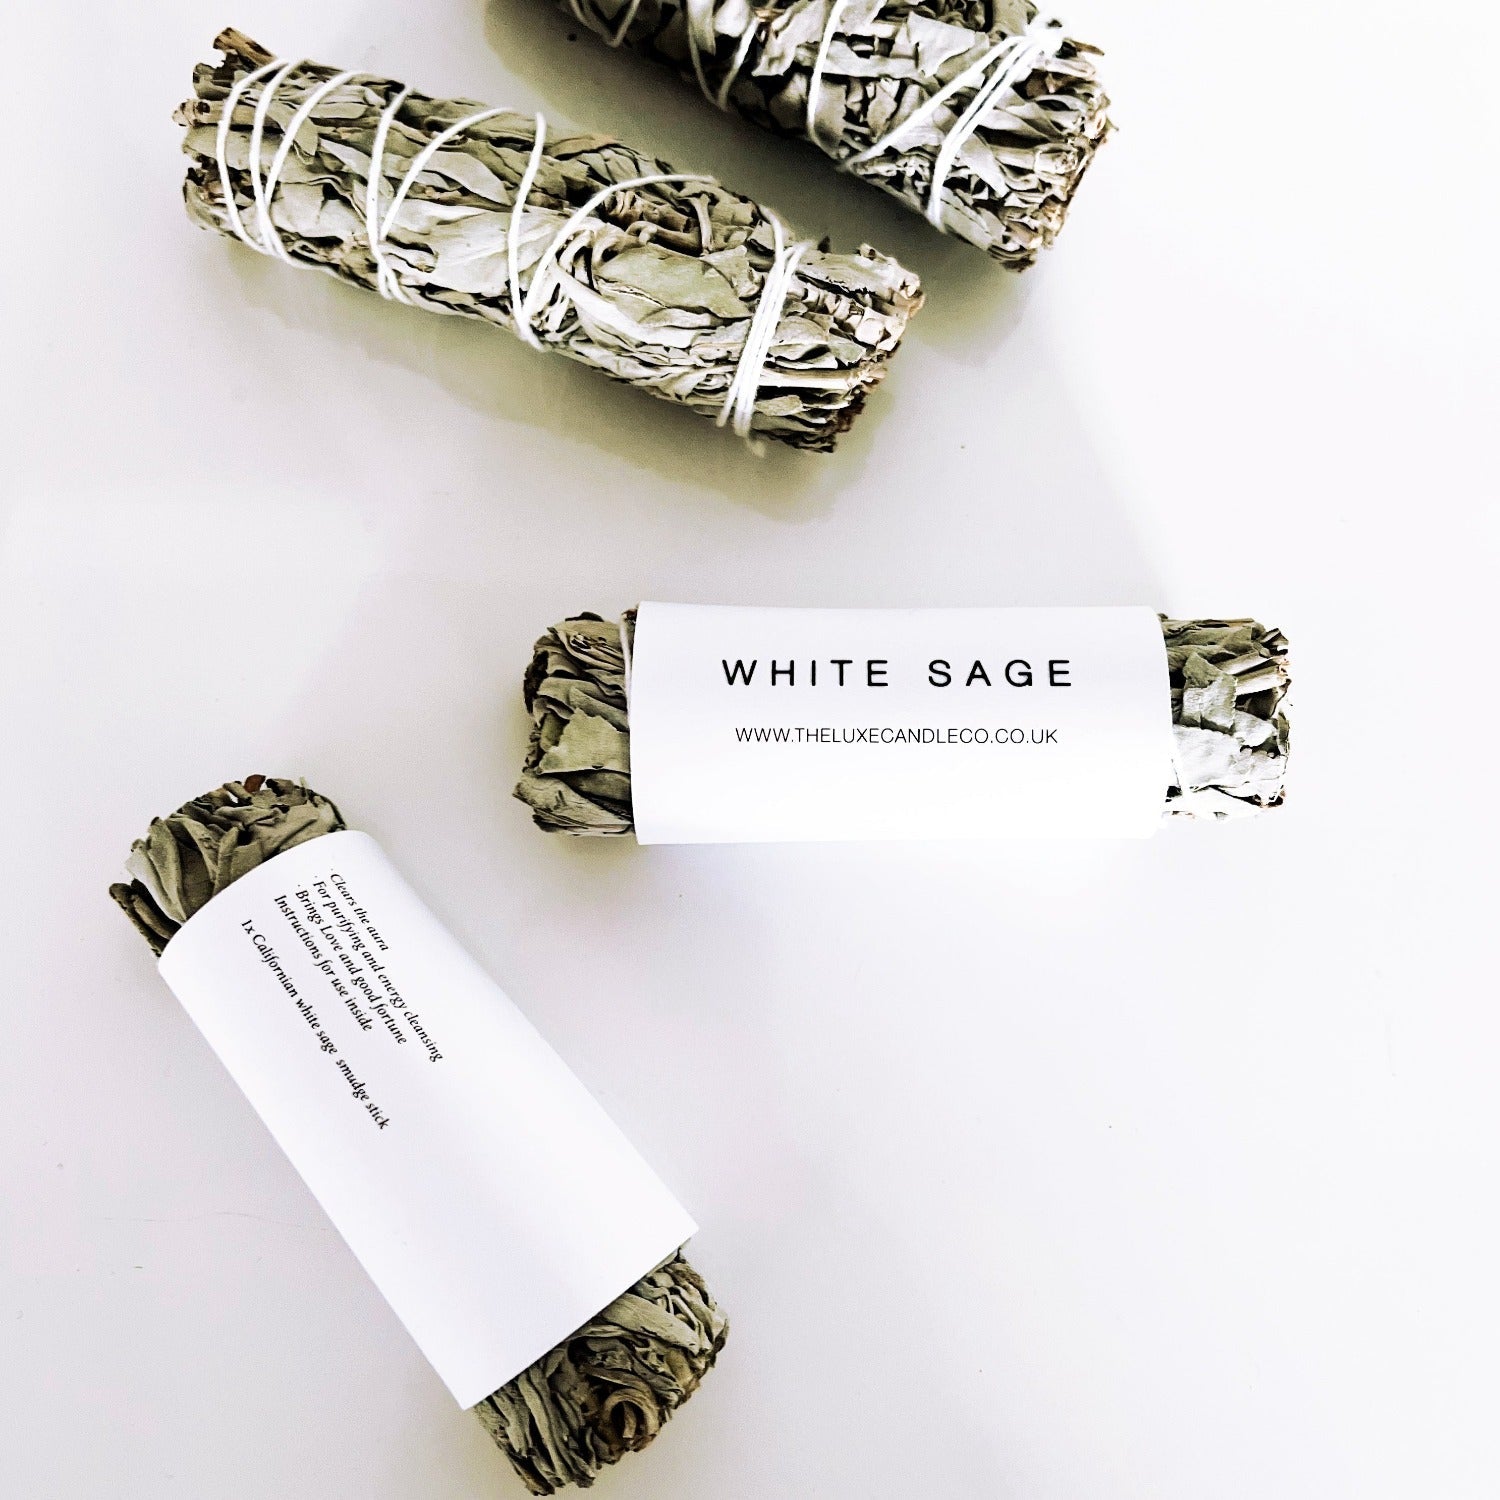 White Sage for clearing energy neutralising vibrations